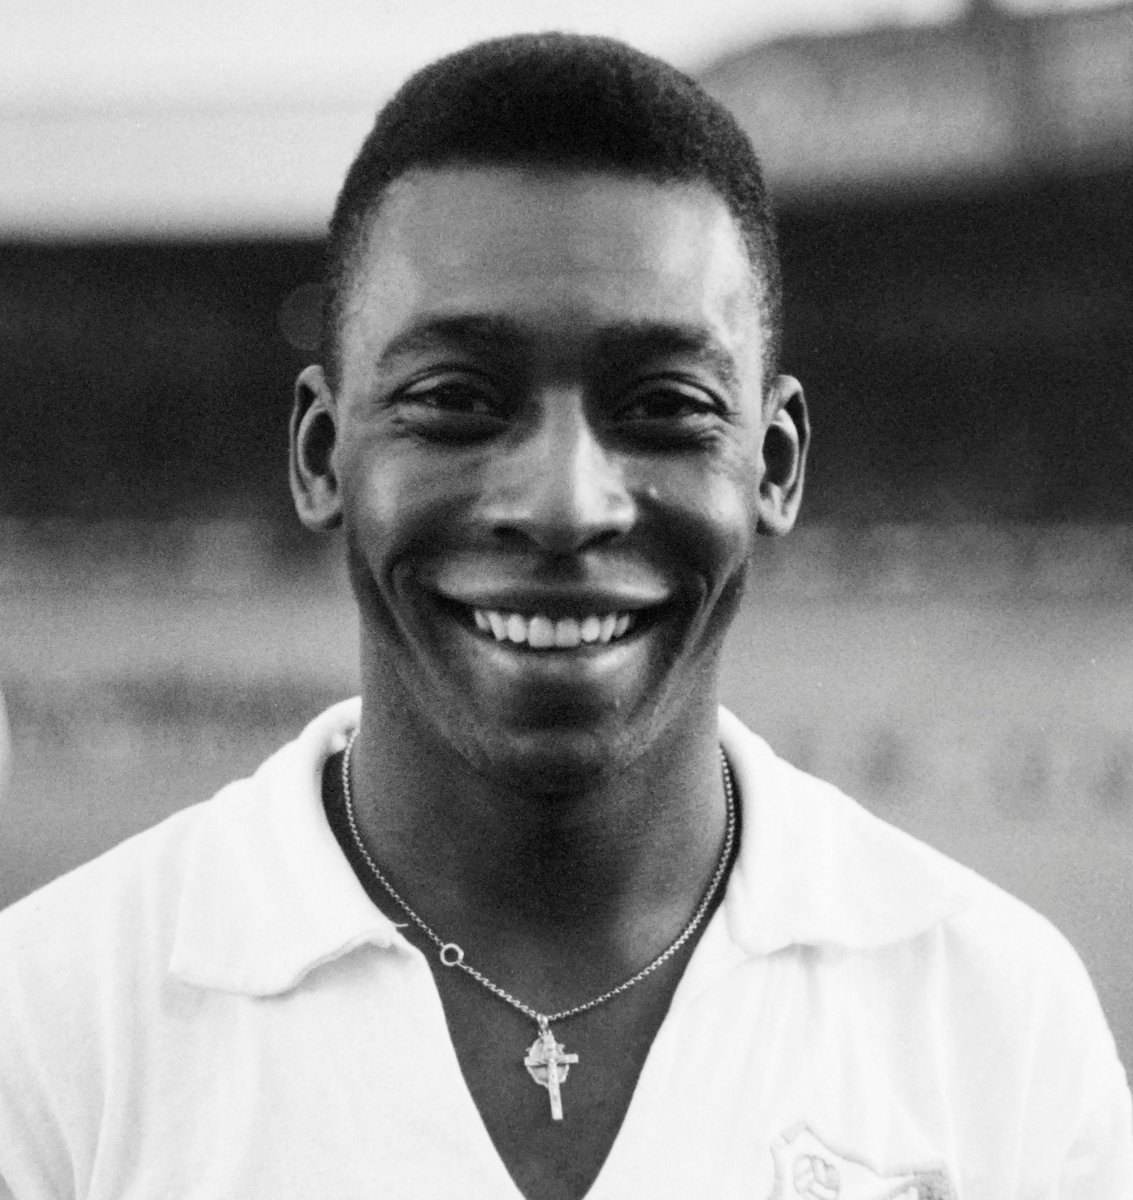 An icon’s icon. We are saddened today to hear of the passing of one of football’s greatest ever players, @Pele.